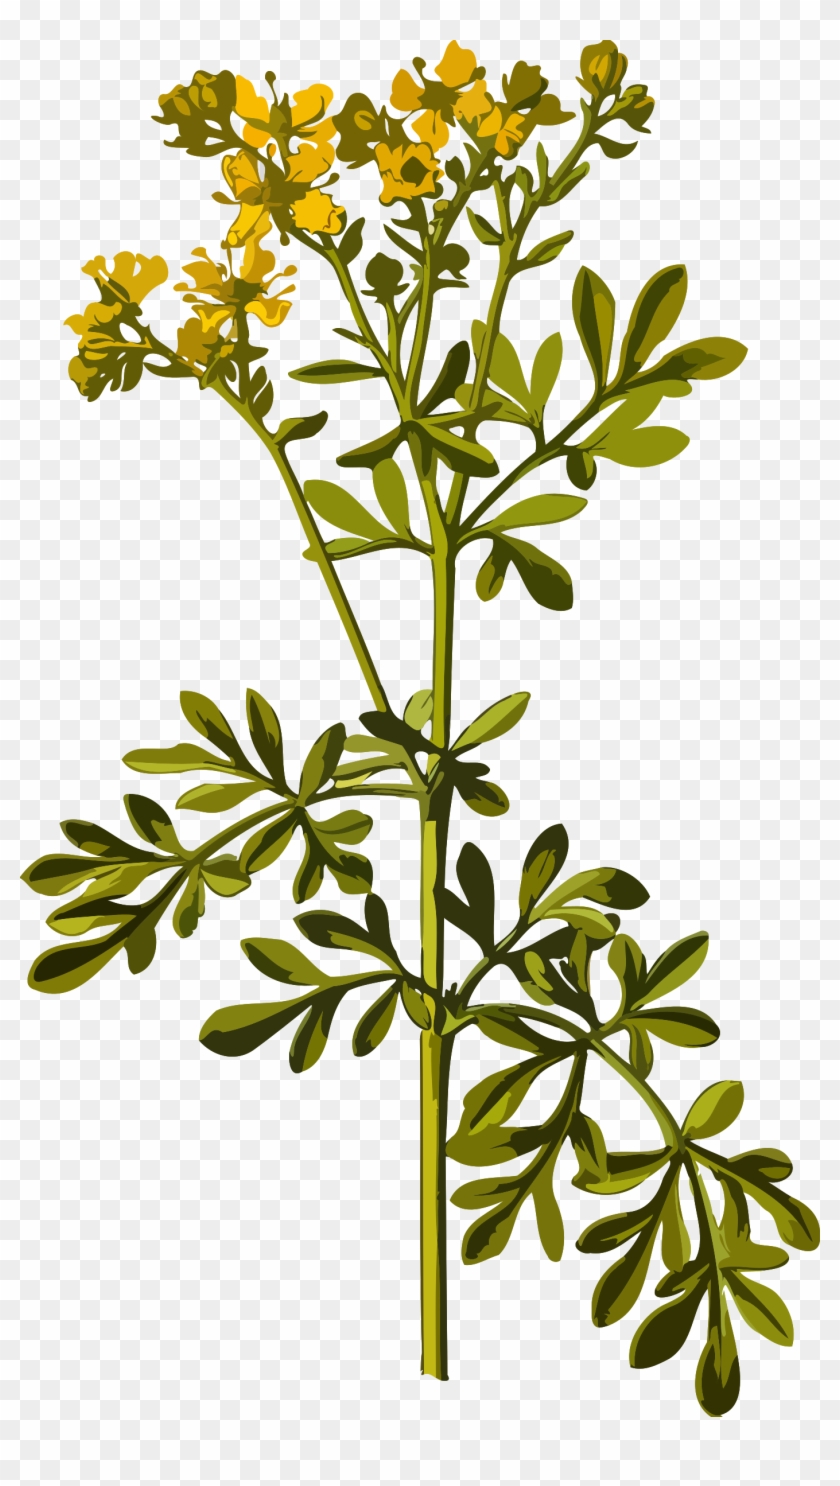 Common Rue By @firkin, From A Drawing In 'medizinal-pflanzen', - Rue Plant Illustration #1217114